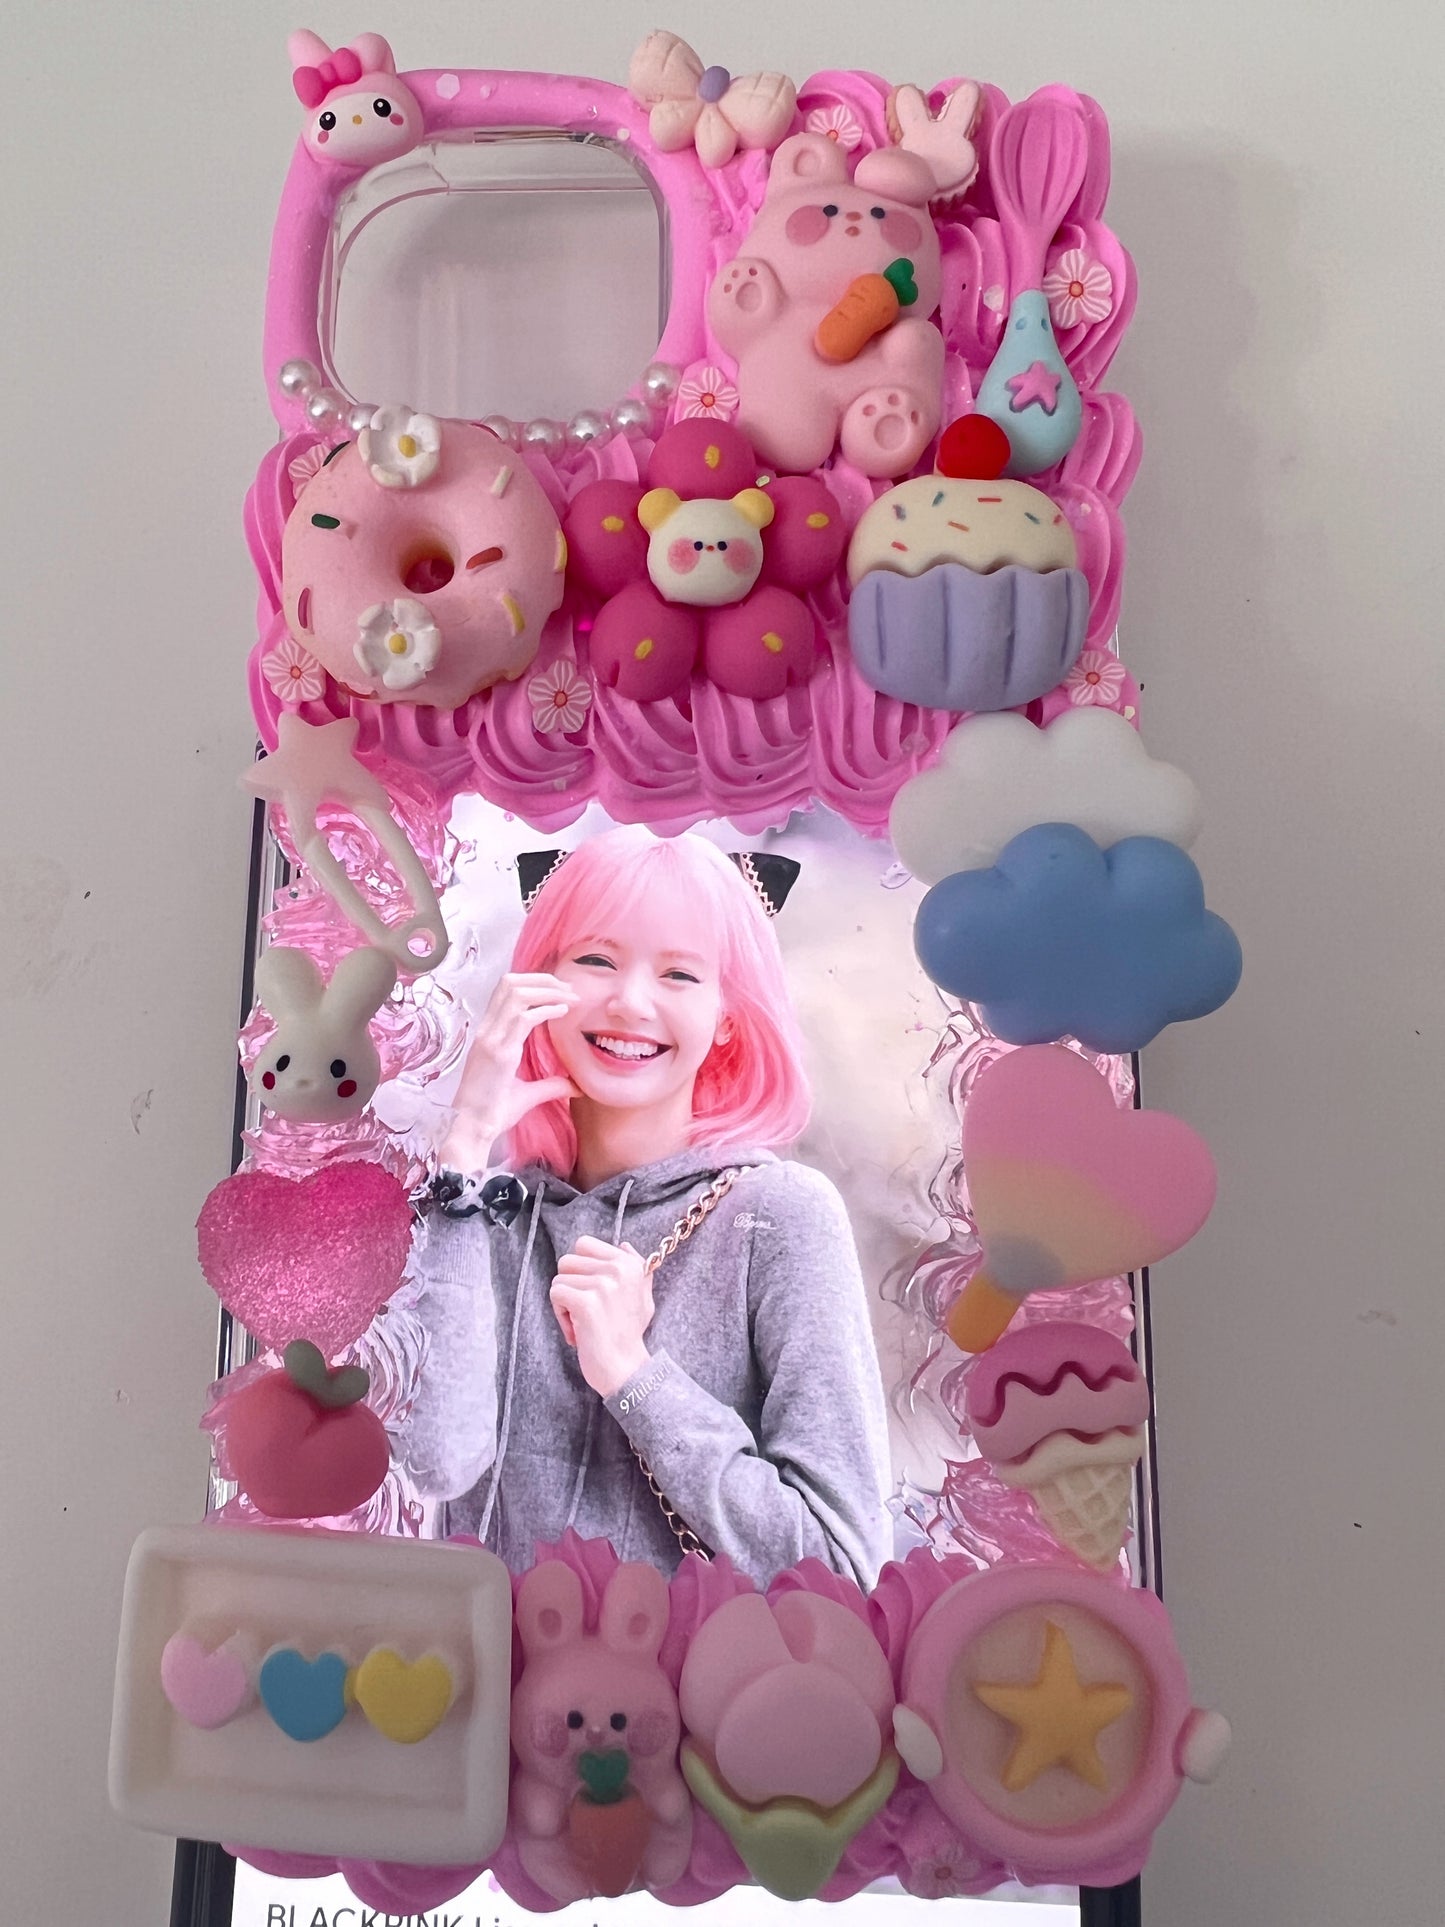 Themed Pink Rabbits Custom Decoden Phone Cases, whipped cream phone cases, Personalized Case, can put photo inside,decoden case,decoden charms,Put your favorite idol's picture